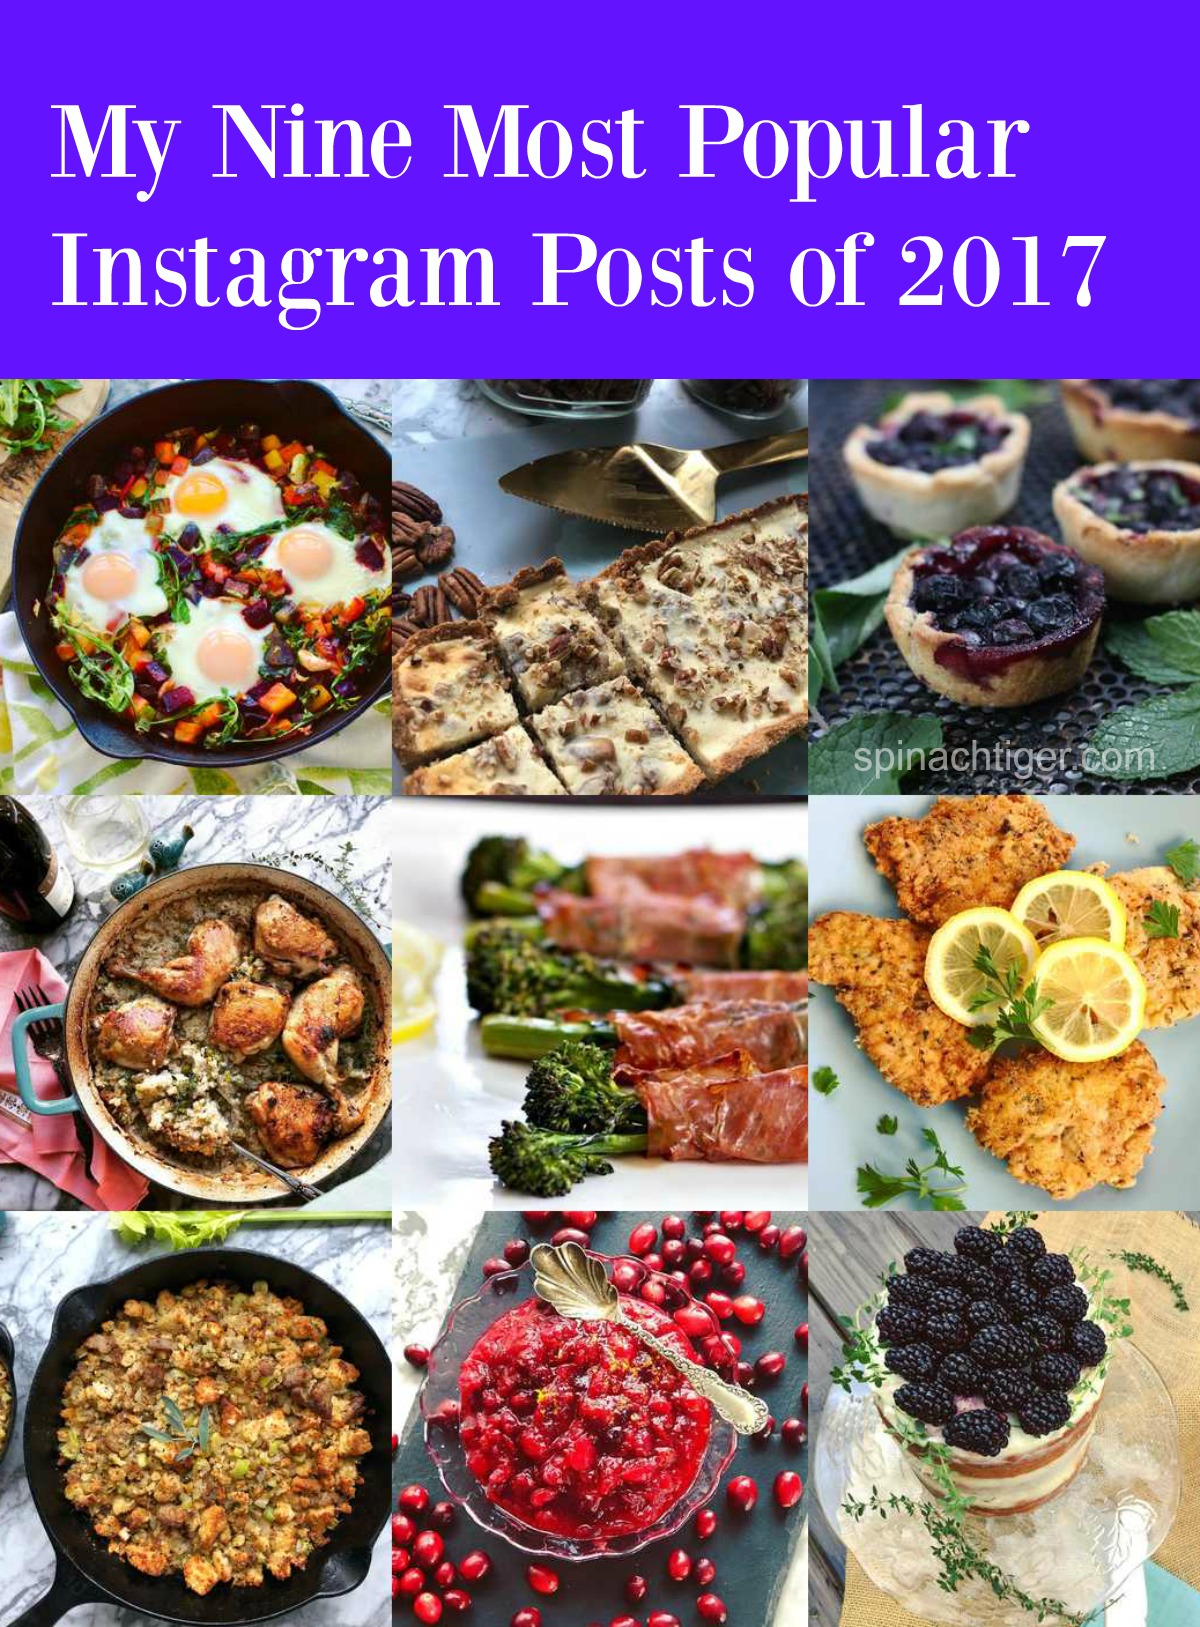 My most popular instagram recipe posts of 2017 from Spinach Tiger